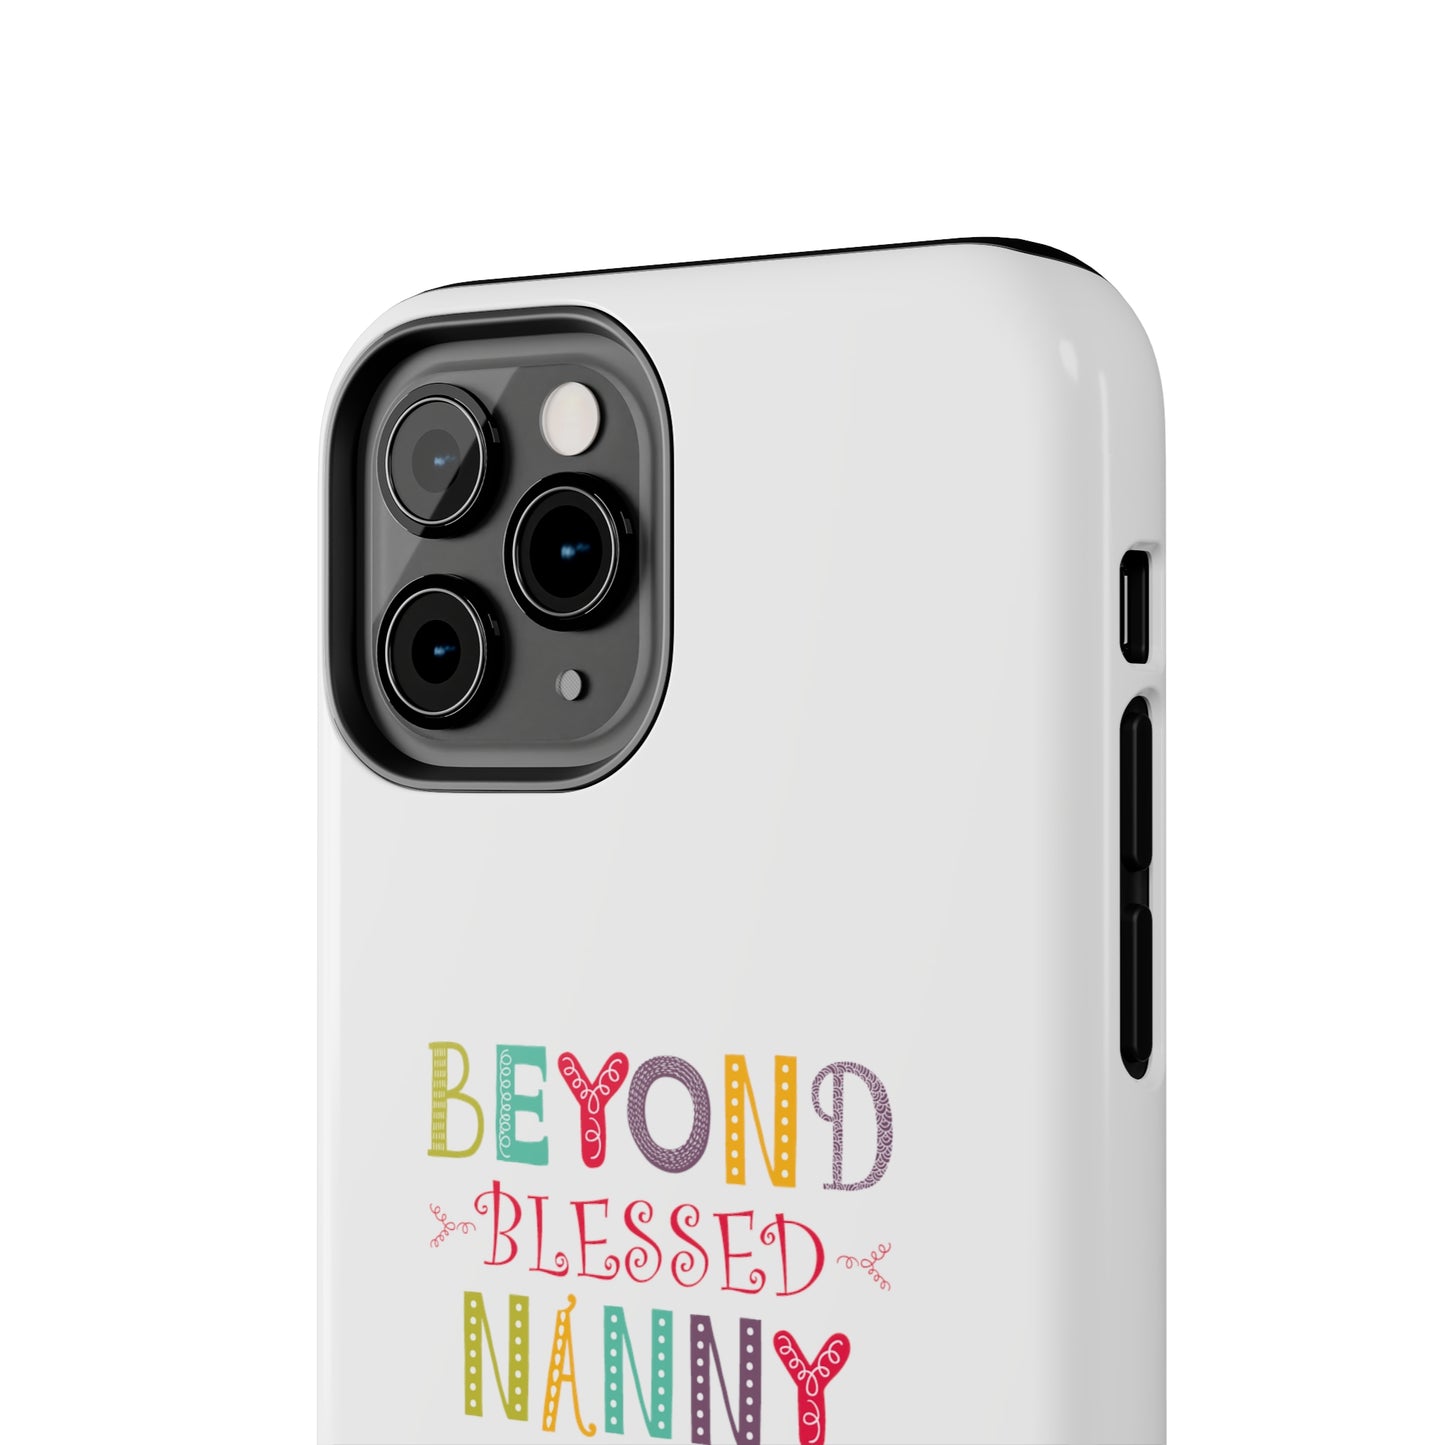 Beyond Blessed Nanny - Playful - Tough Phone Cases